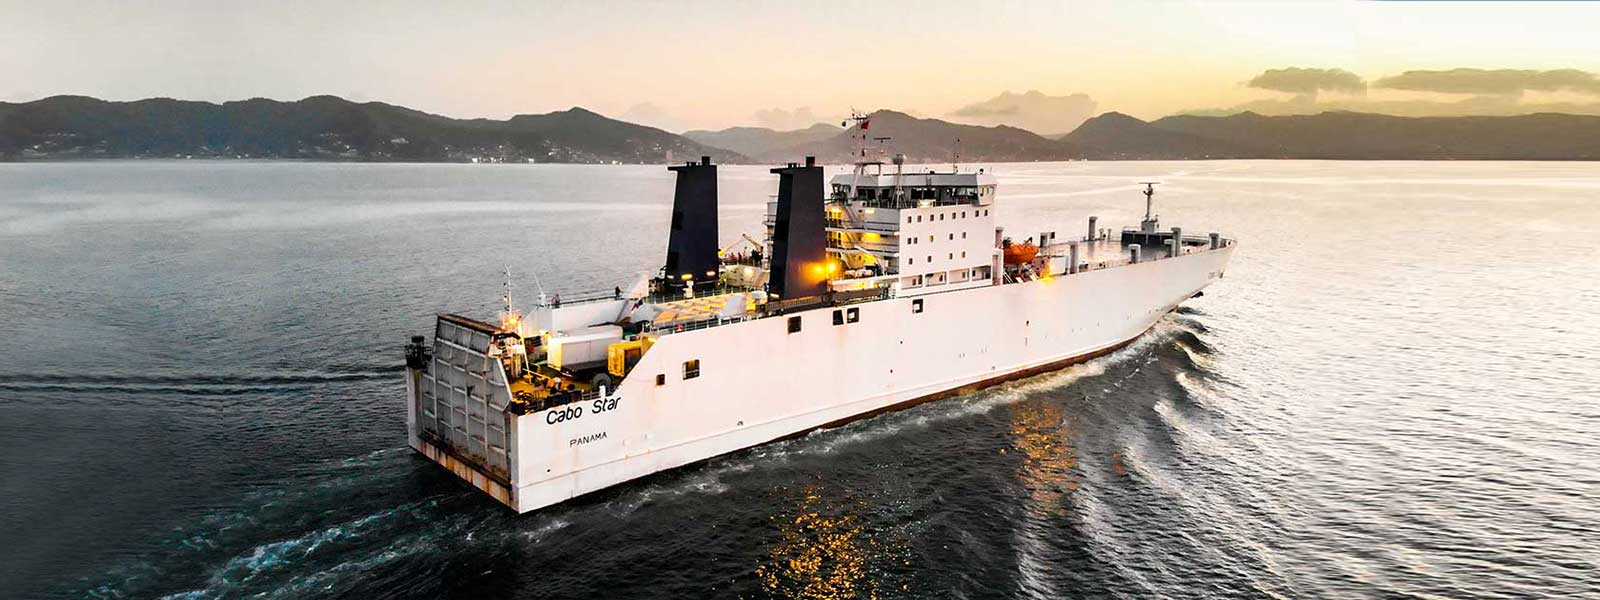 Mechanical issues delays M.V Cabo Star’s sailing